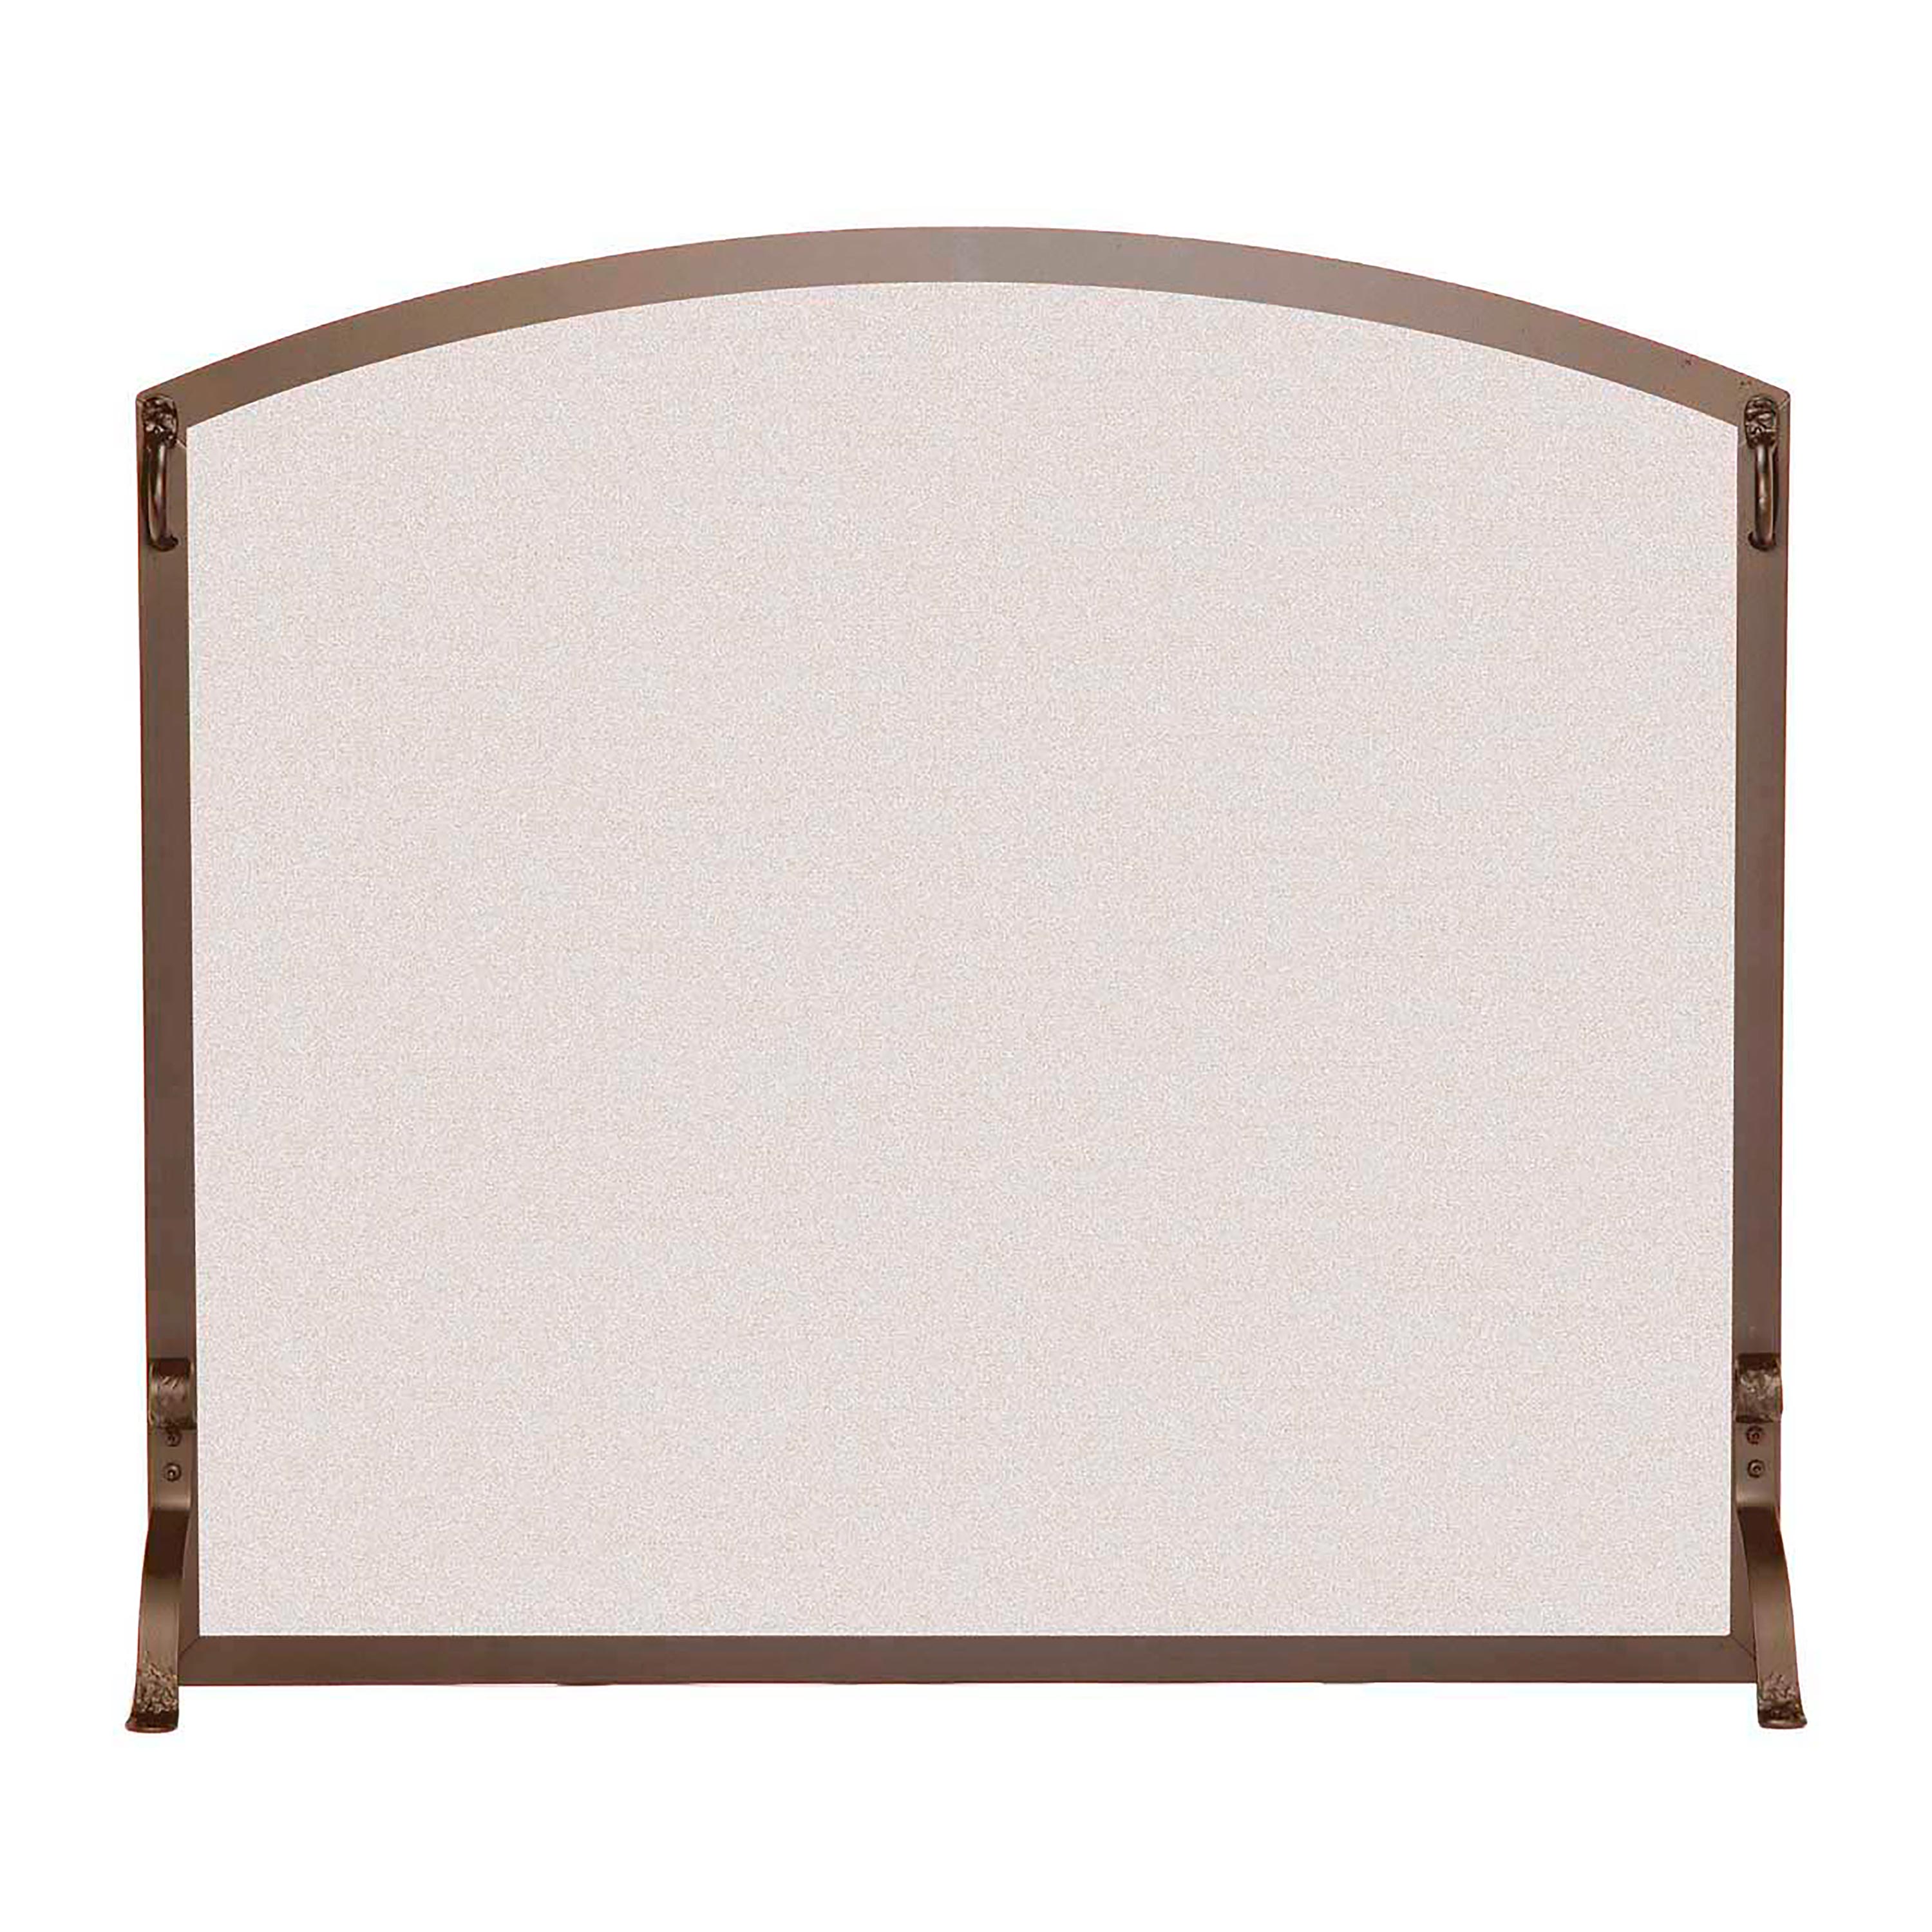 Medium Custom Flat Guard with Arched Top - 1,351 to 2,300 sq. inches - Burnished Bronze